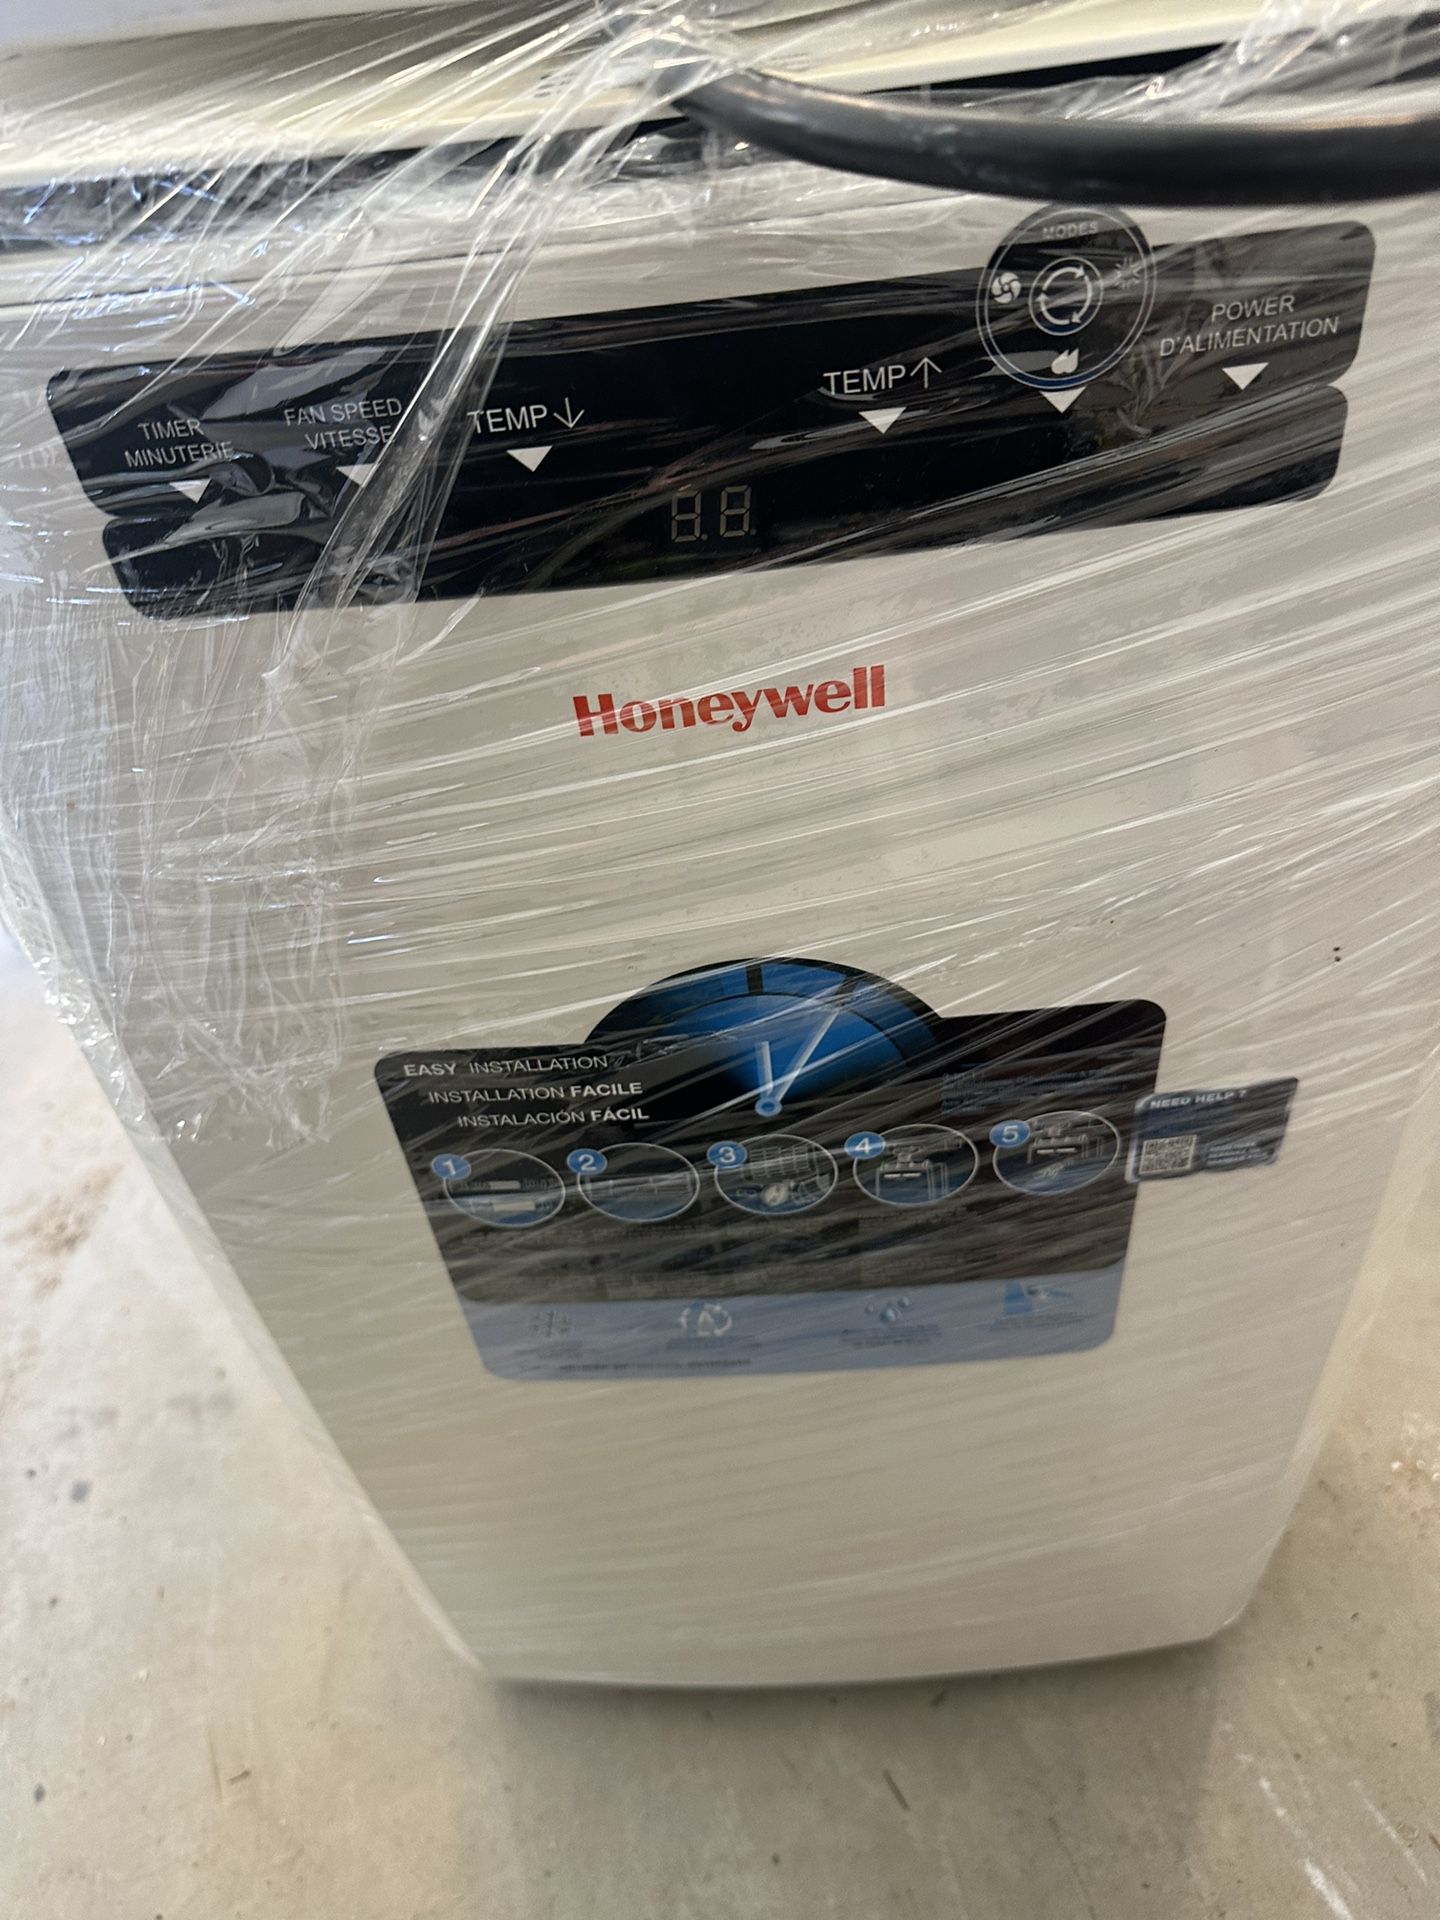 Honeywell MN10CESWW Portable Air Conditioner, 10,000 BTU Cooling, with Dehumidifier & Fan